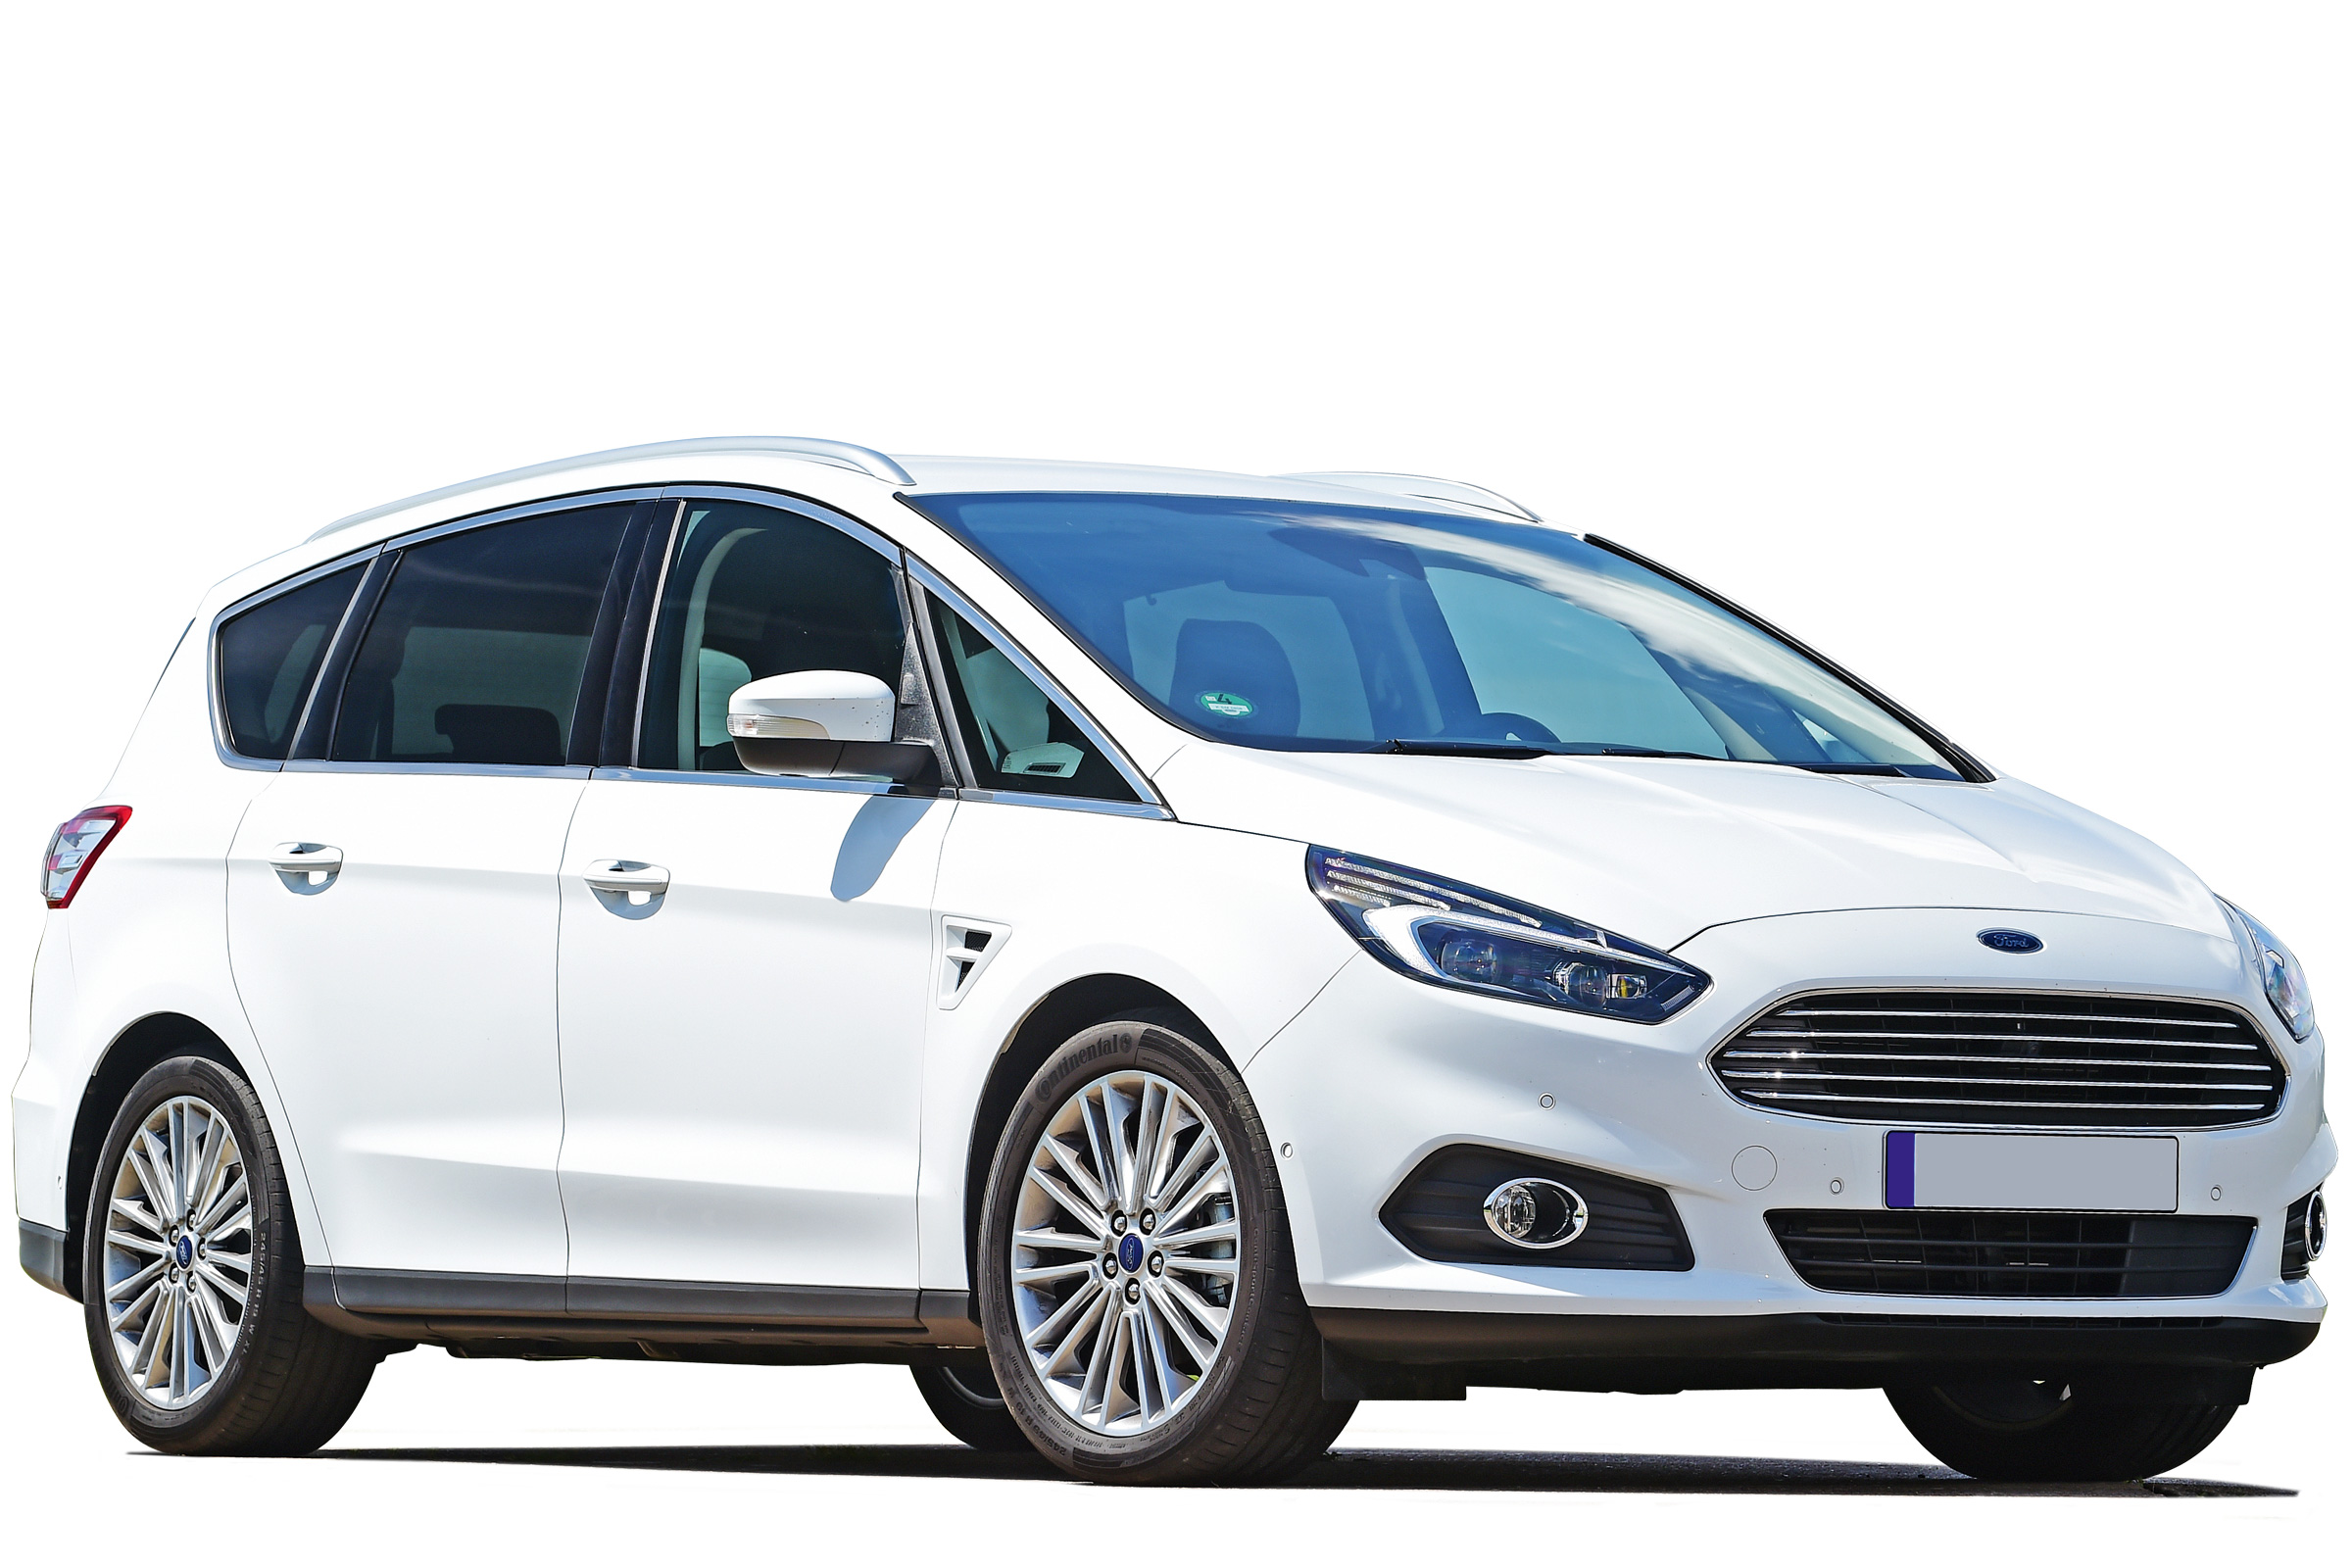 Ford S Max Owner Reviews Mpg Problems Reliability 2020 Review Carbuyer